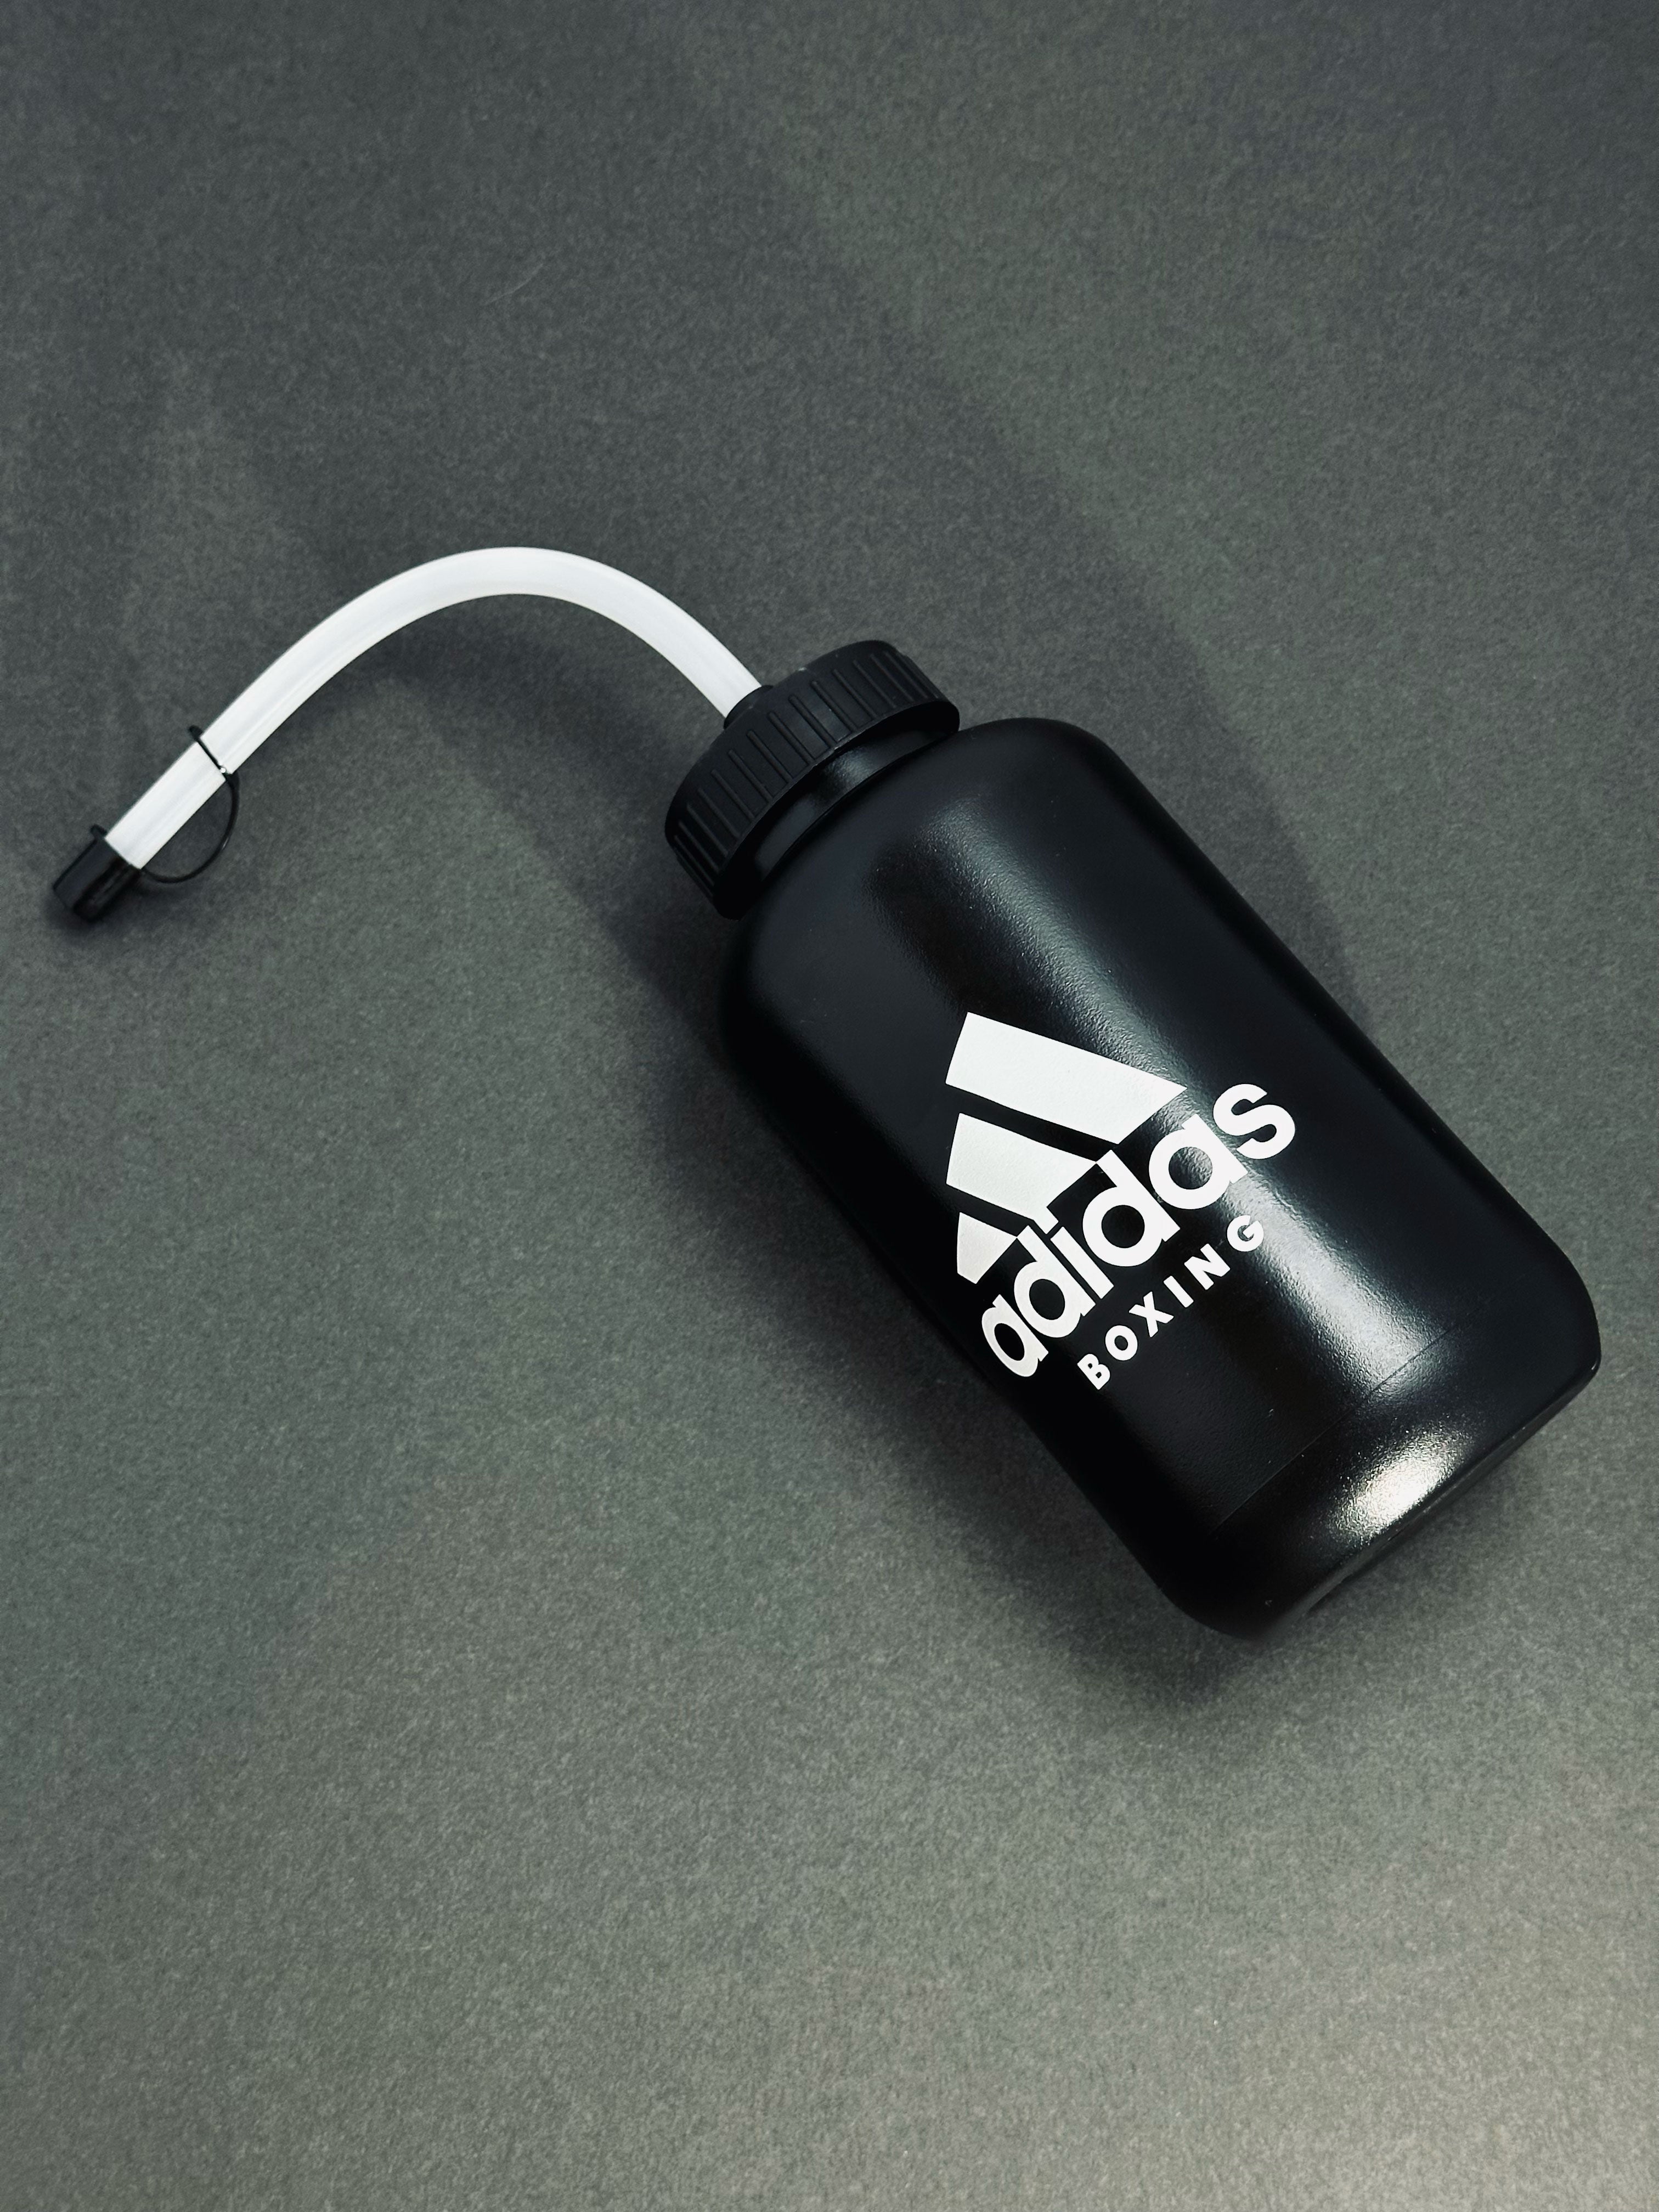 Adidas Black Boxing Water Bottle with Long Straw adiBWB011L, Ideal for Boxing Lacrosse Hockey Football Sports and Fitness Gym Hydration - Sports Leak Proof squeeze water jugs on floor